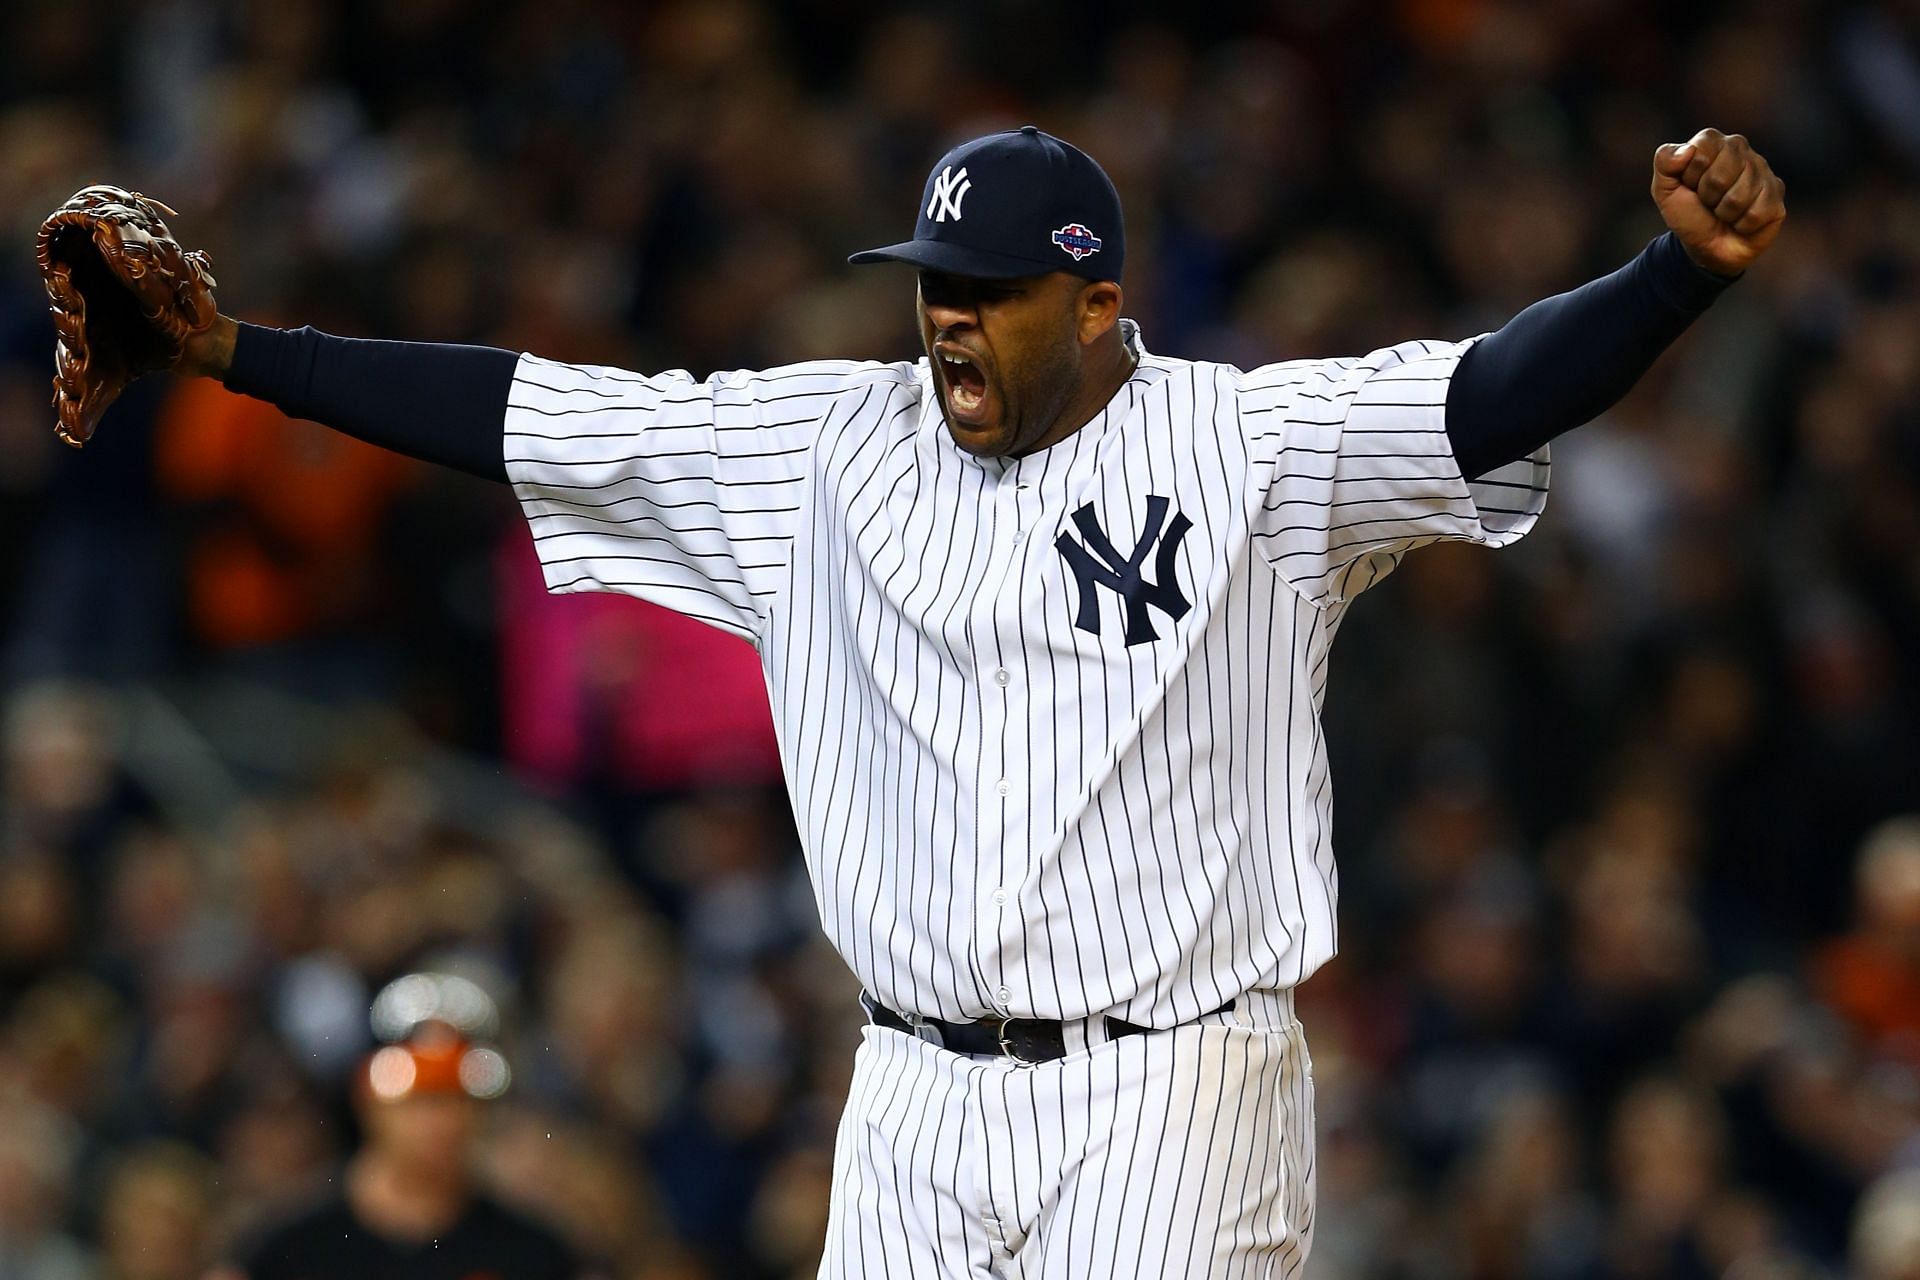 The last time the Yankees had a dominant rotation, it was headlined by C.C. Sabathia